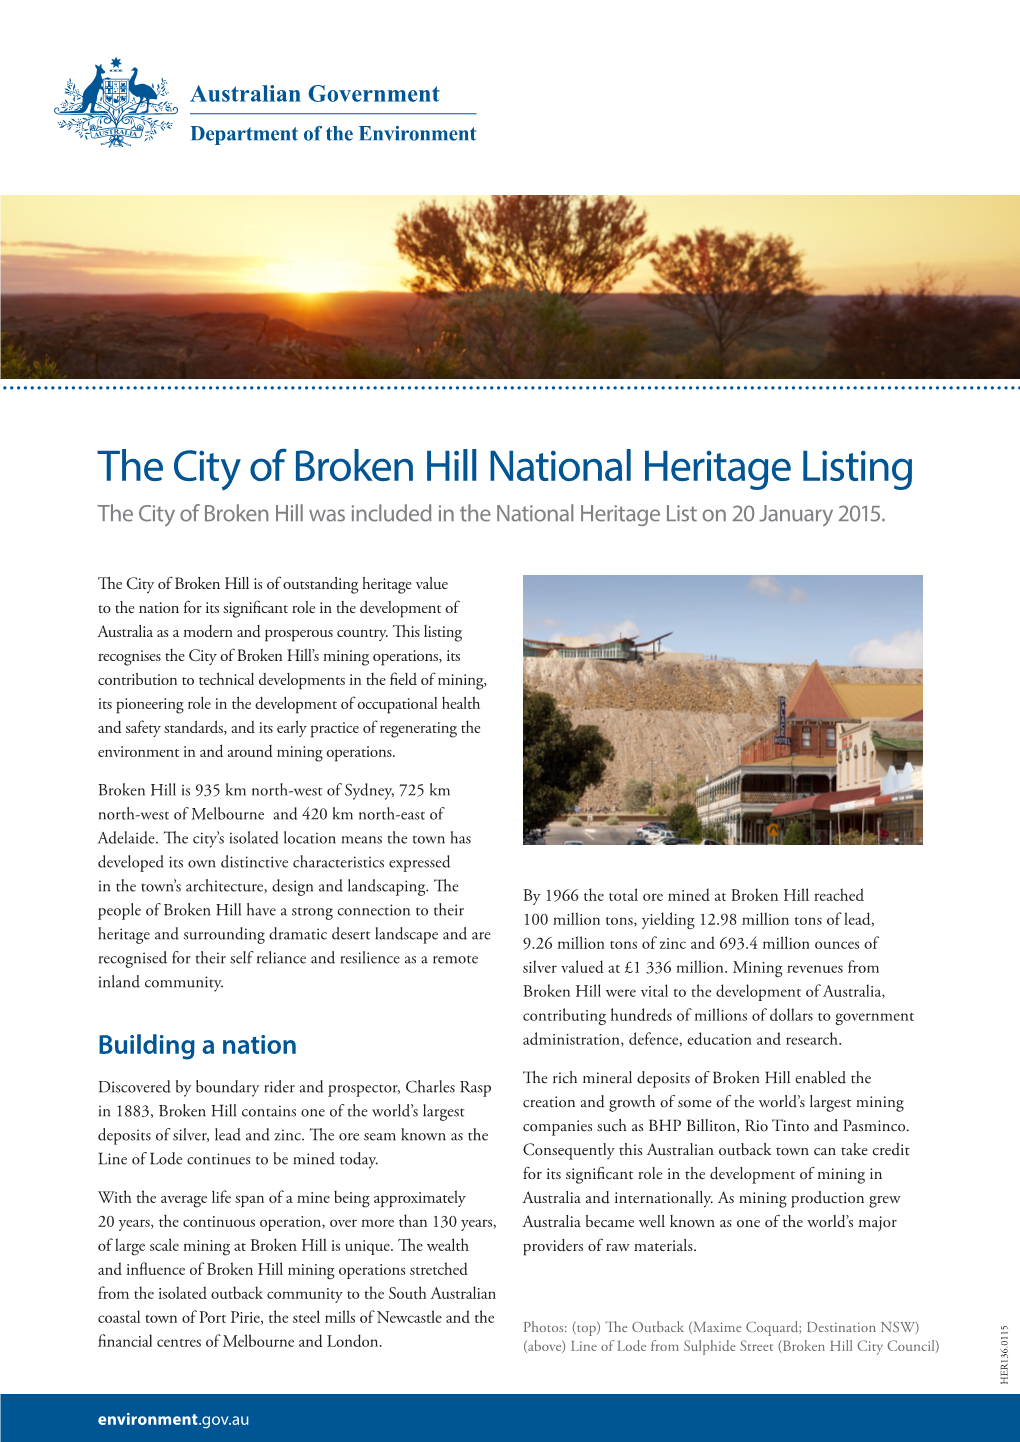 The City of Broken Hill National Heritage Listing Factsheet